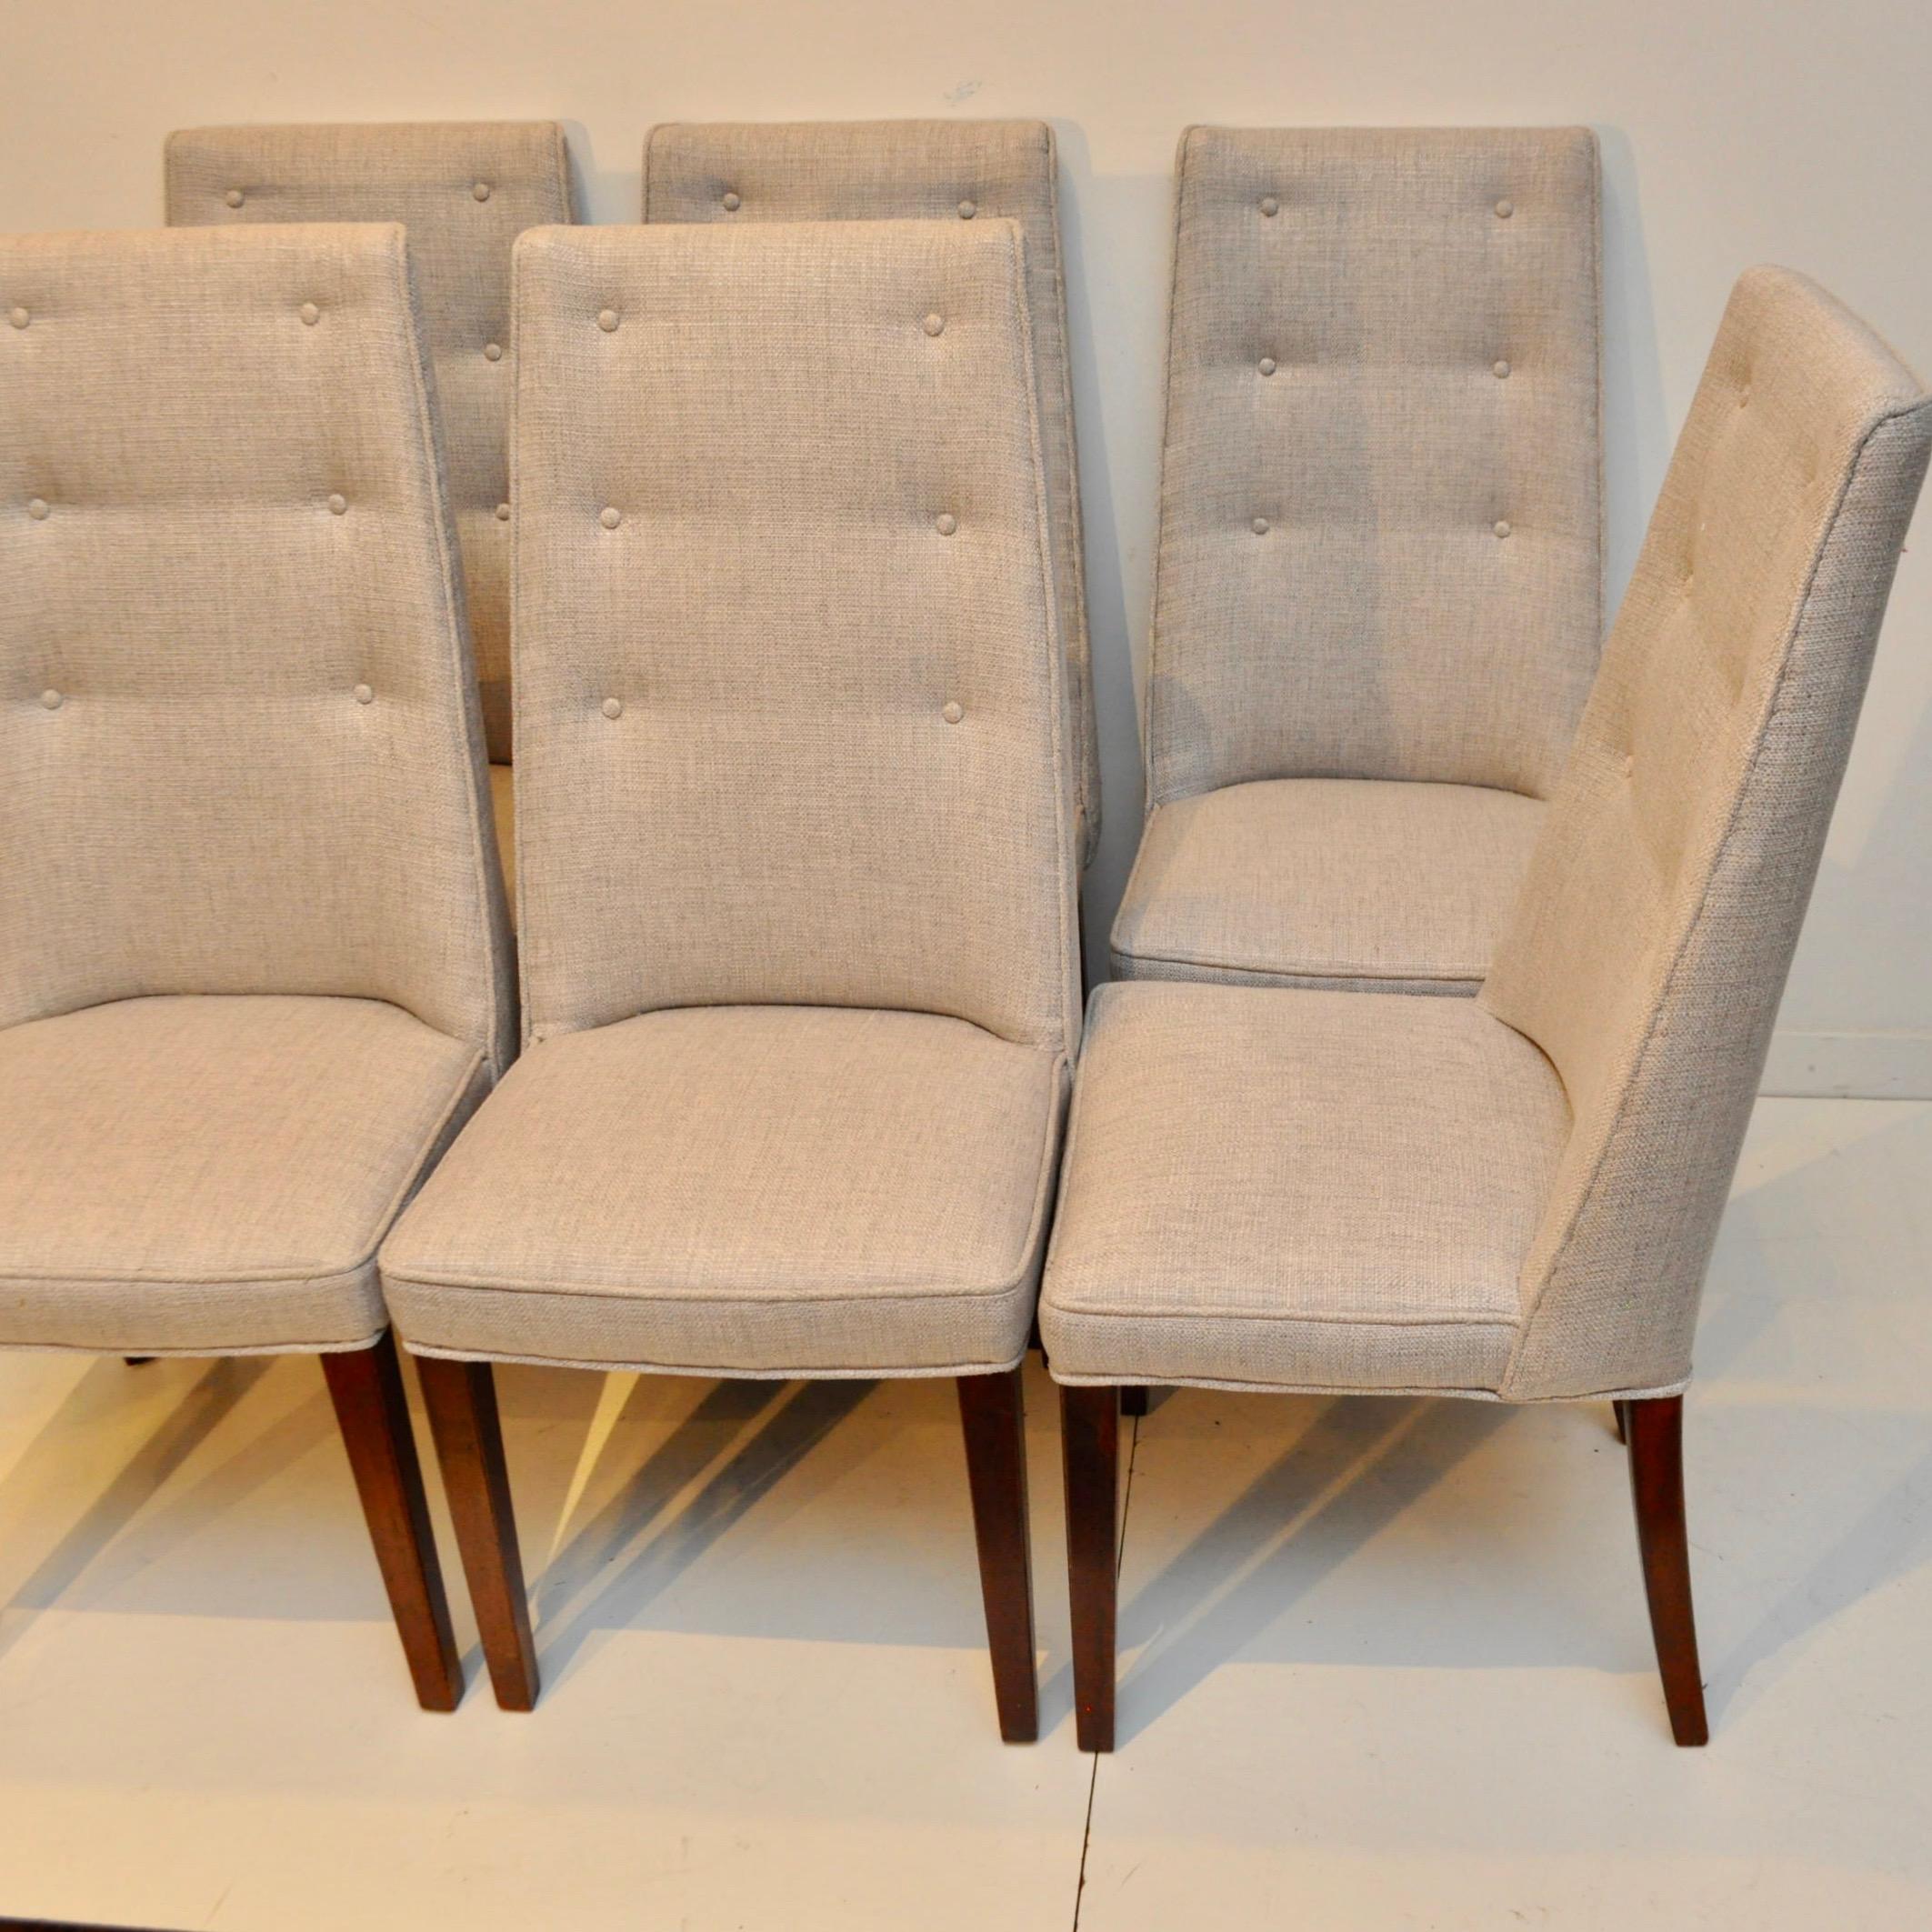 Danish Set of 8 Midcentury High-Backed Dining Chairs from Denmark